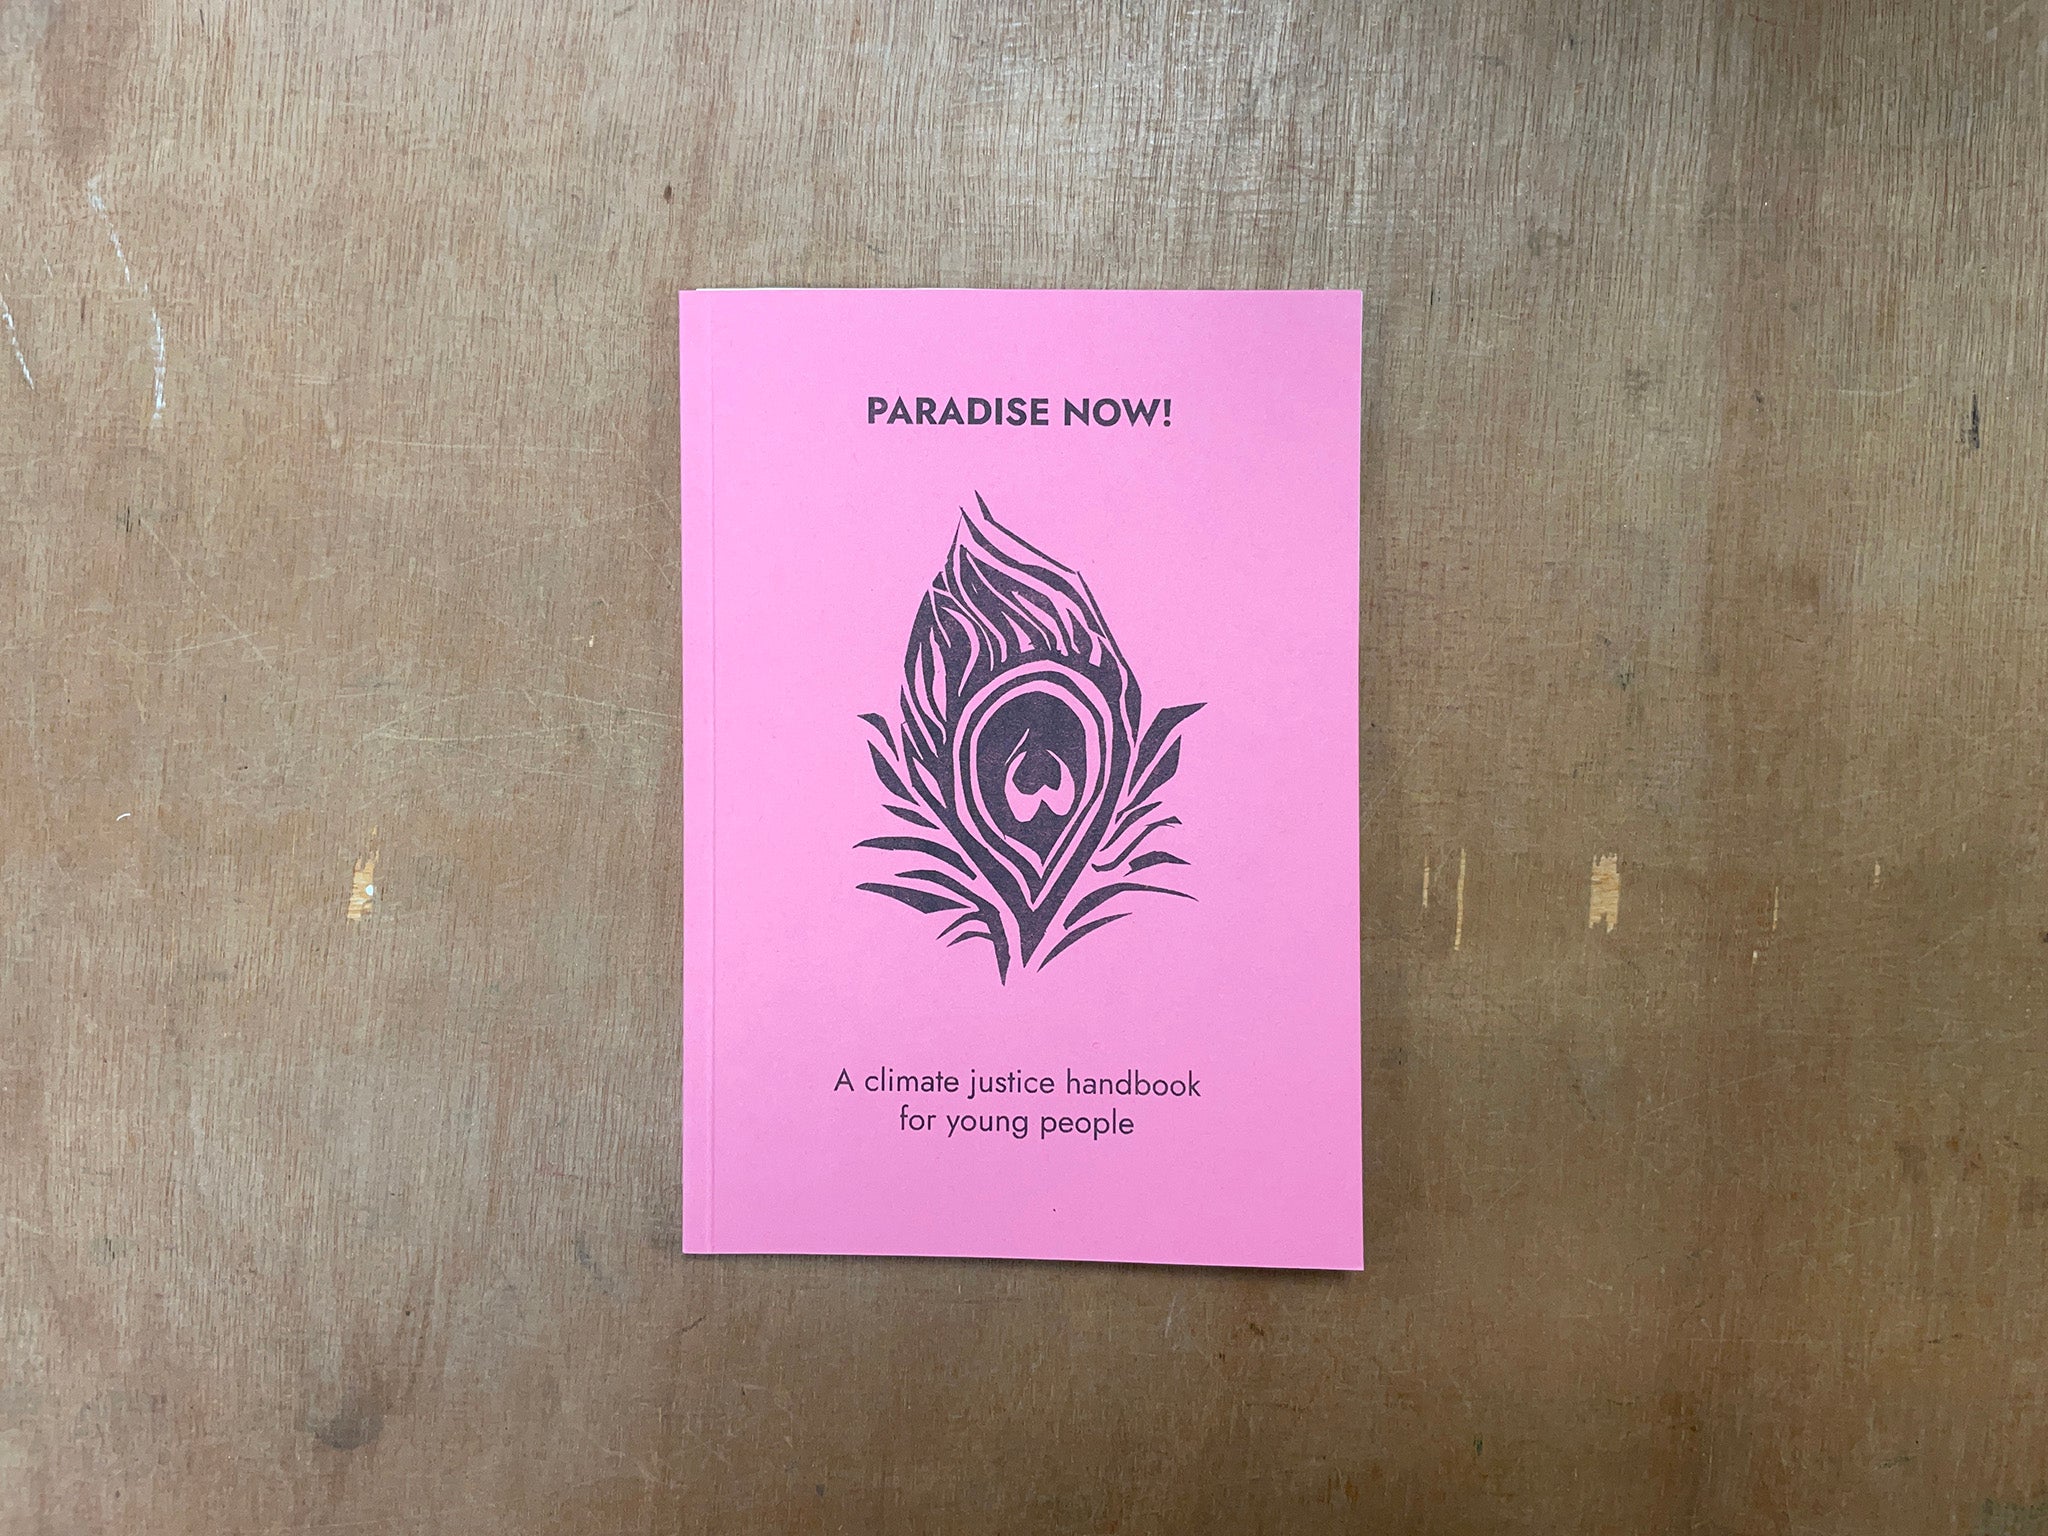 PARADISE NOW! A CLIMATE JUSTICE HANDBOOK FOR YOUNG PEOPLE Edited by Hussein Mitha